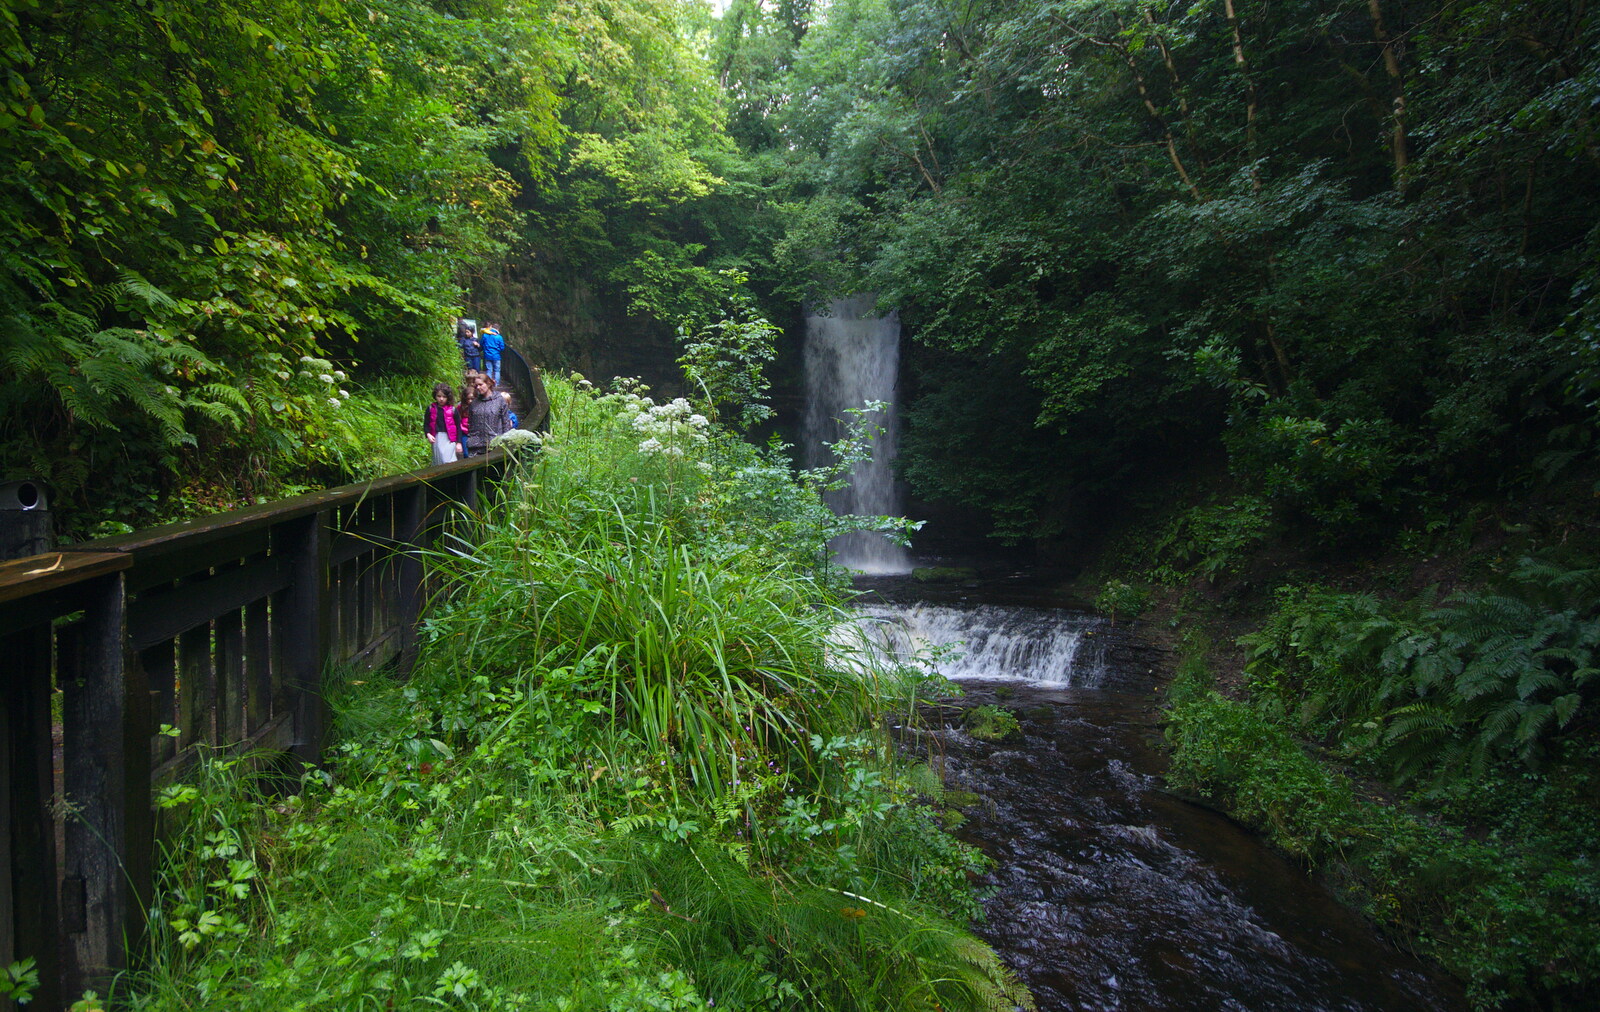 The leafy glades of Glencar waterfall from Glencar Waterfall and Parke's Castle, Kilmore, Leitrim, Ireland - 18th August 2019